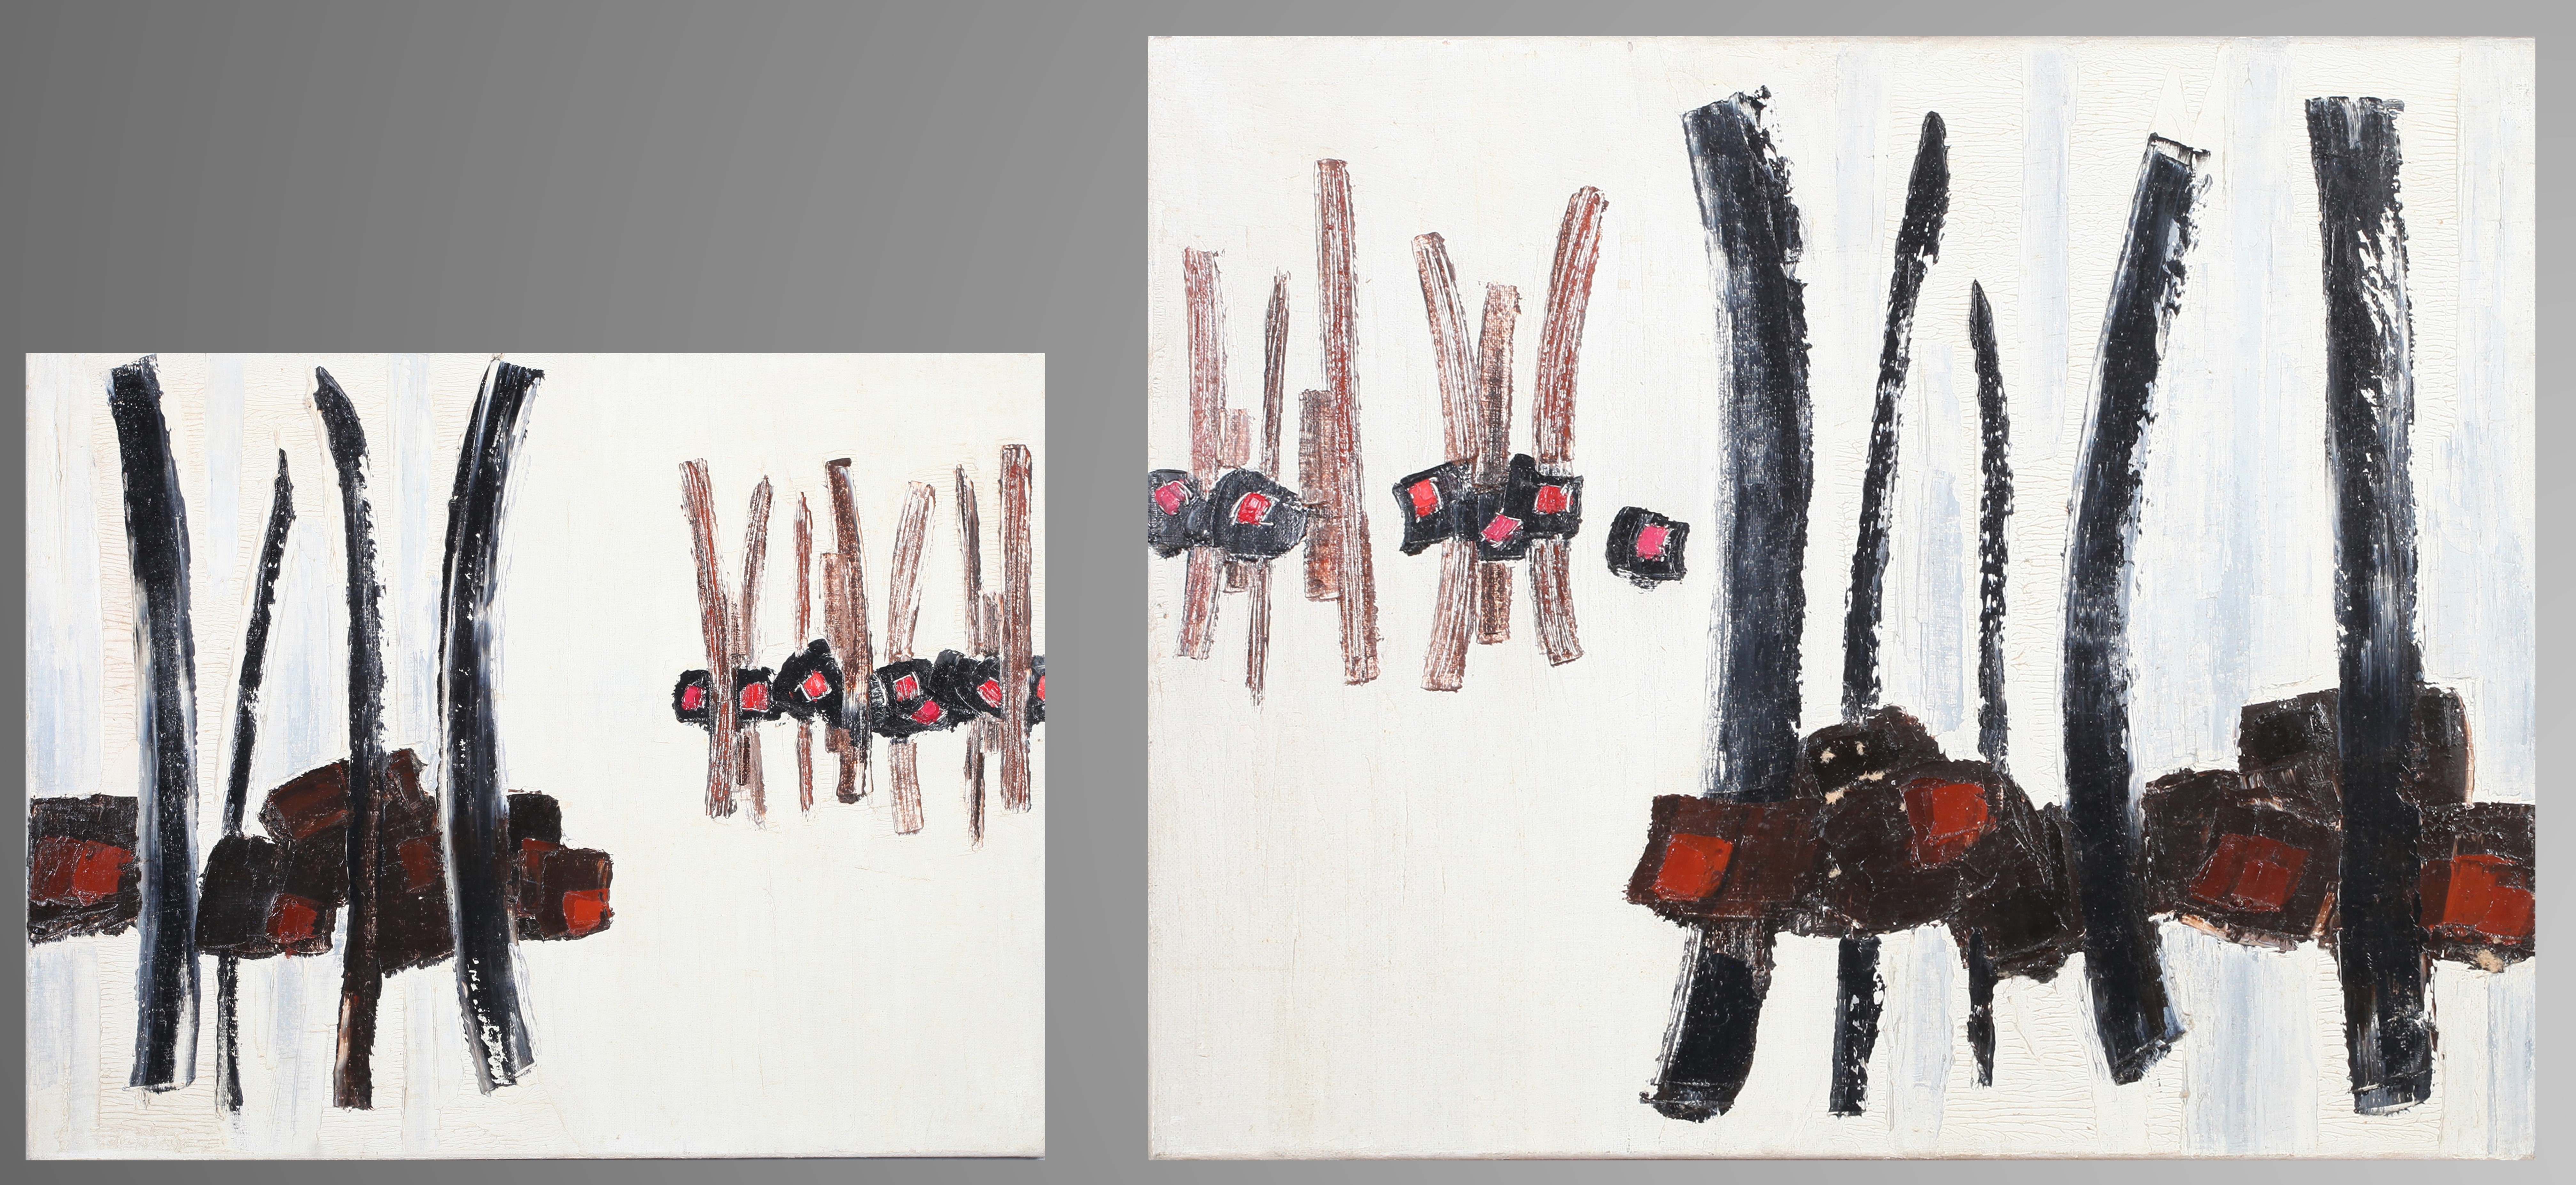 ARR DRUIE BOWETT (1924-1998) Dyptic, verticals in black and brown with red, oil on canvas, signed to